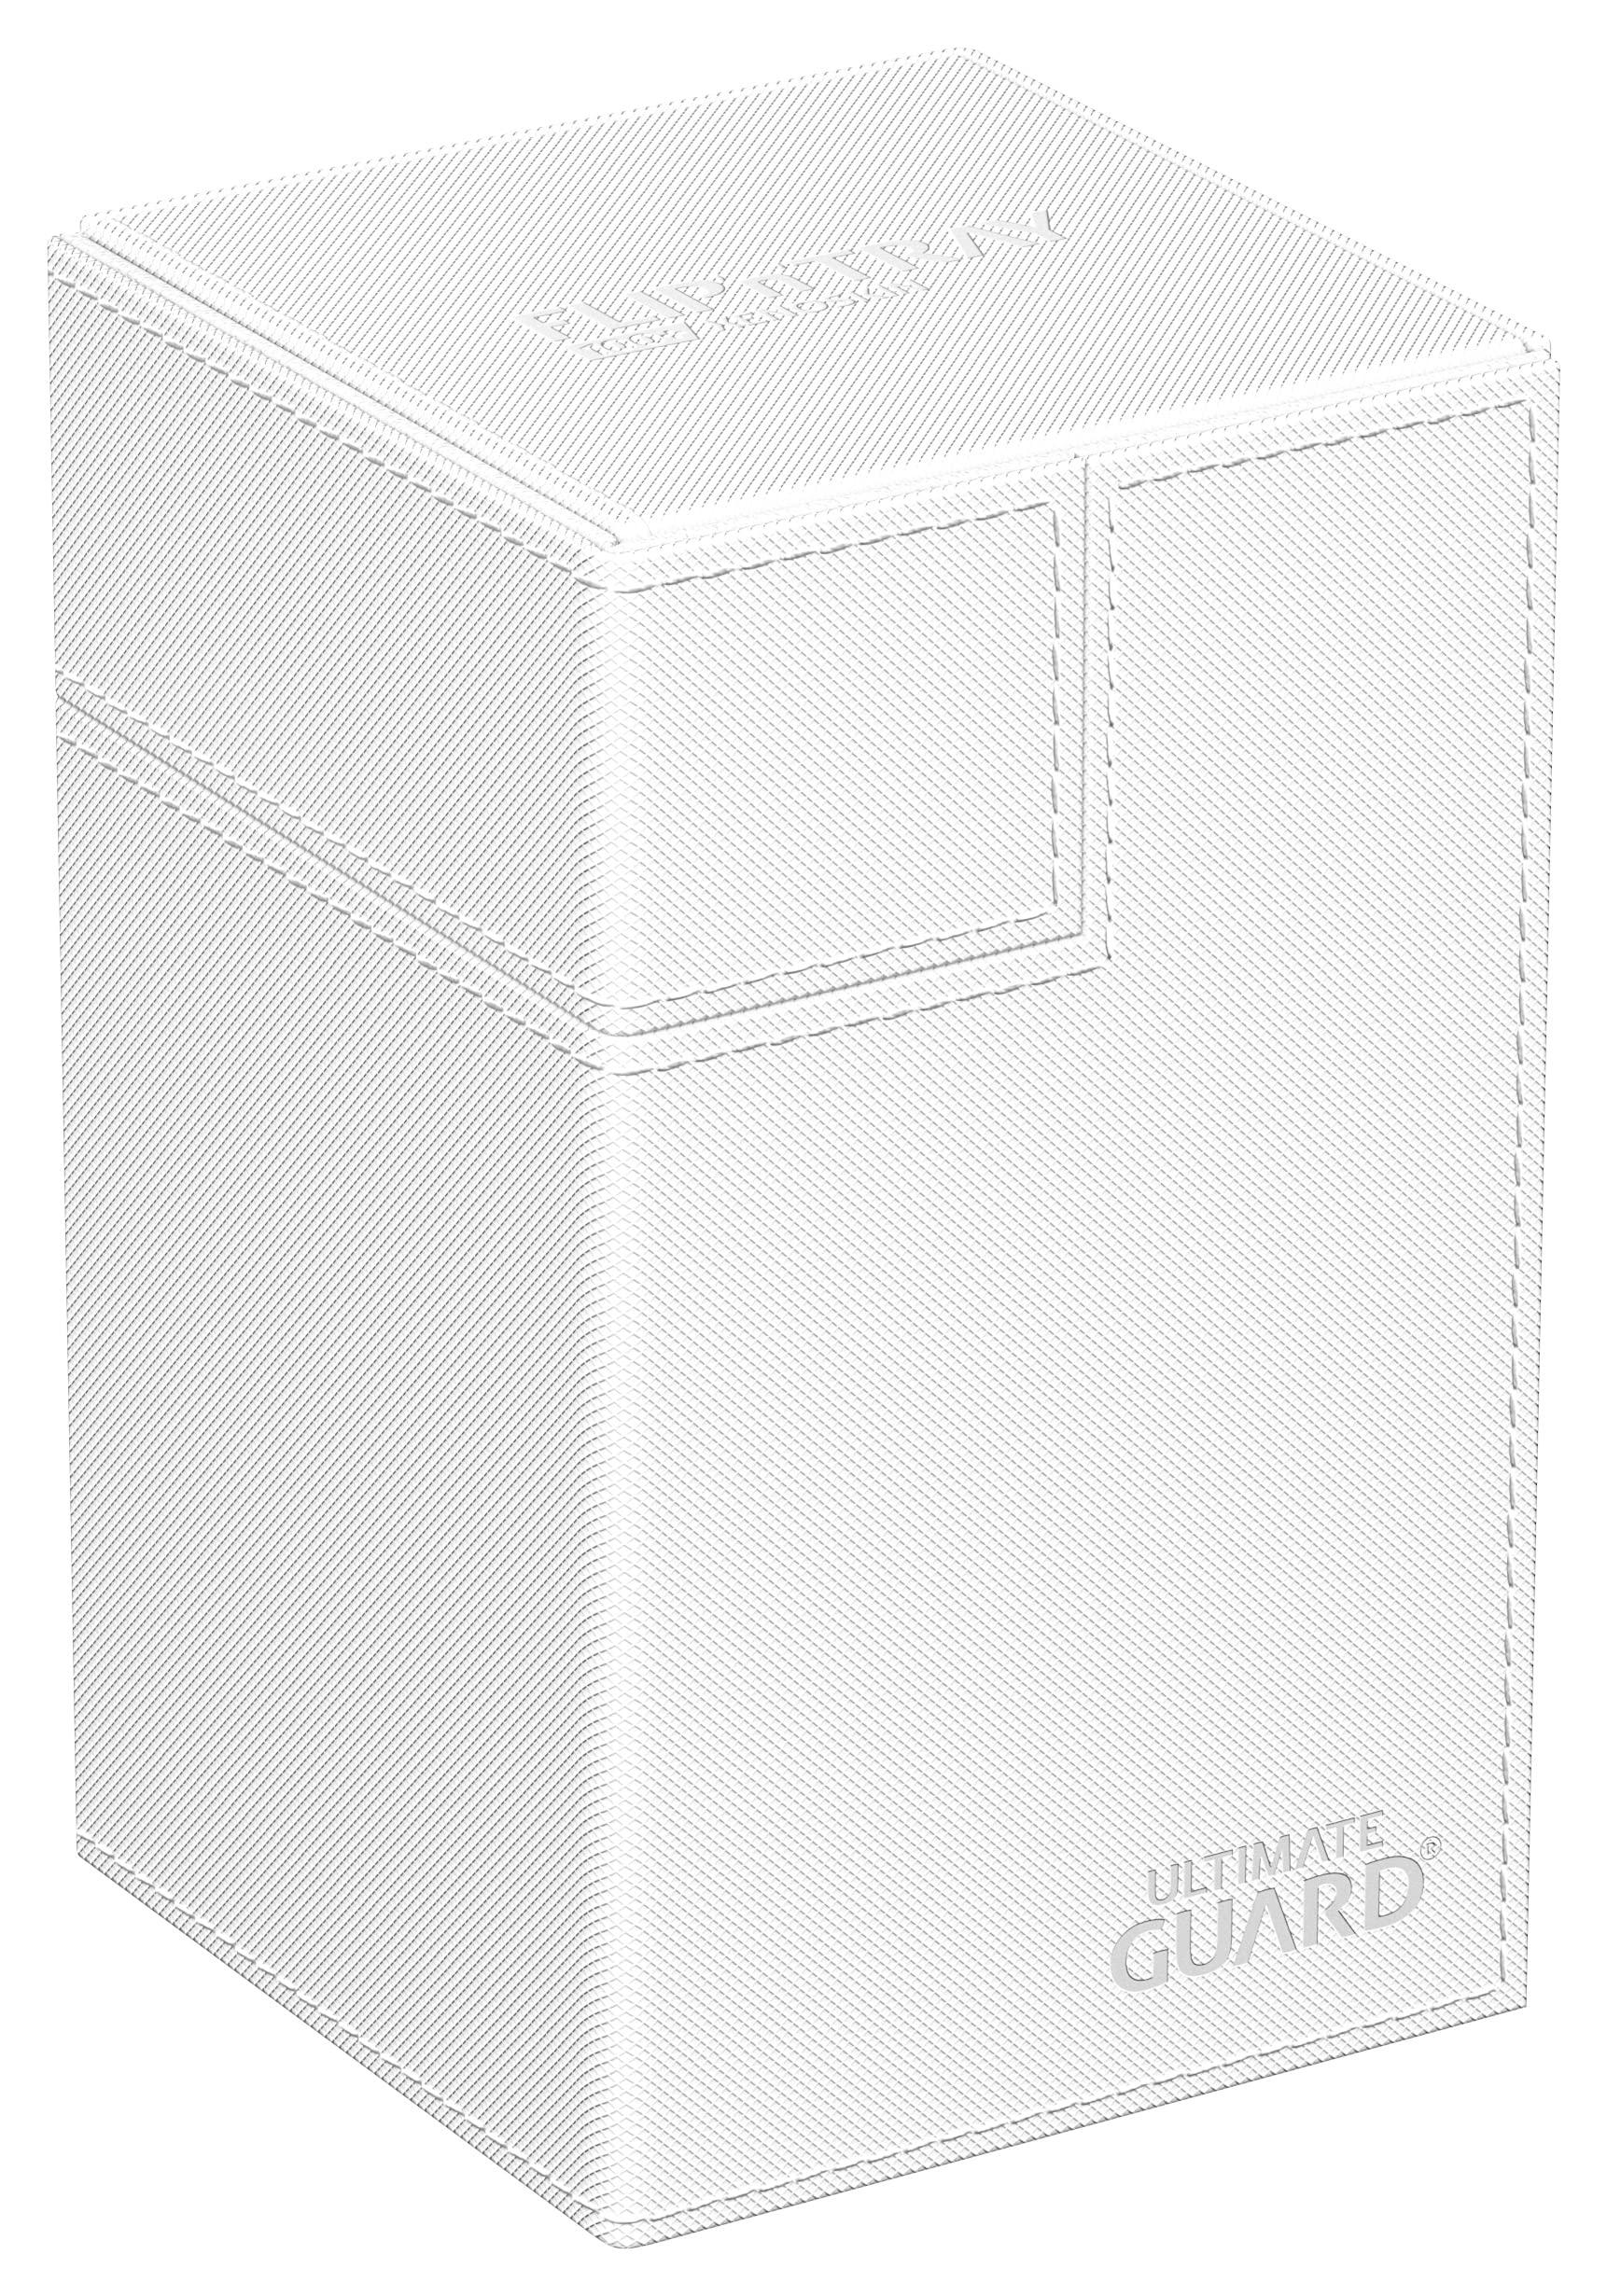 ultimate guard flip 'n' tray 100+, deck case for 100 double-sleeved tcg cards + dice tray, white, independent magnetic closur